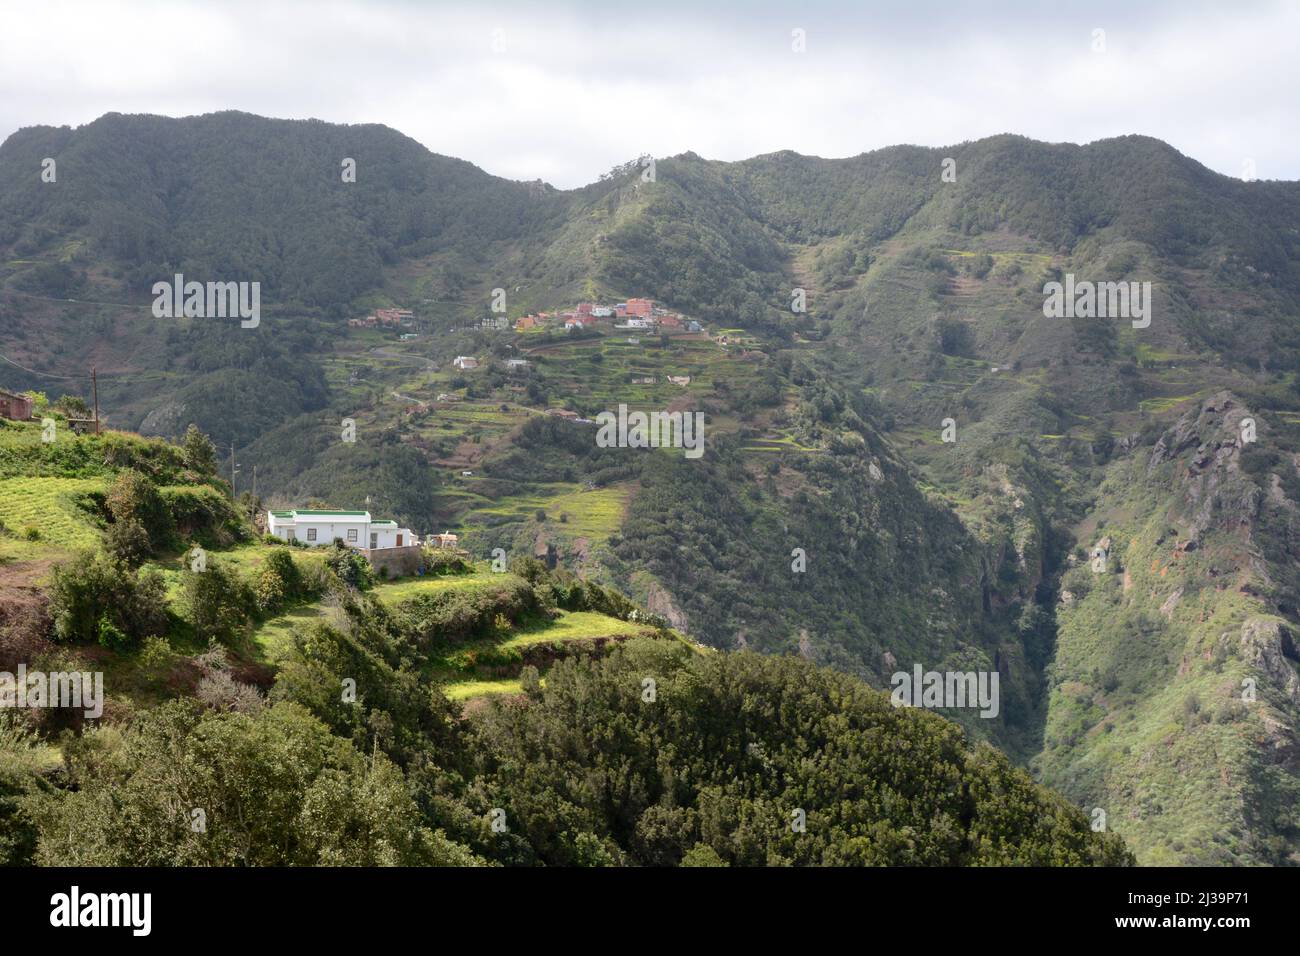 The Spanish village of Las Carboneras in the Anaga Mountains of Tenerife, seen from the town of Taborno, Anaga Rural Park, Canary Islands, Spain. Stock Photo